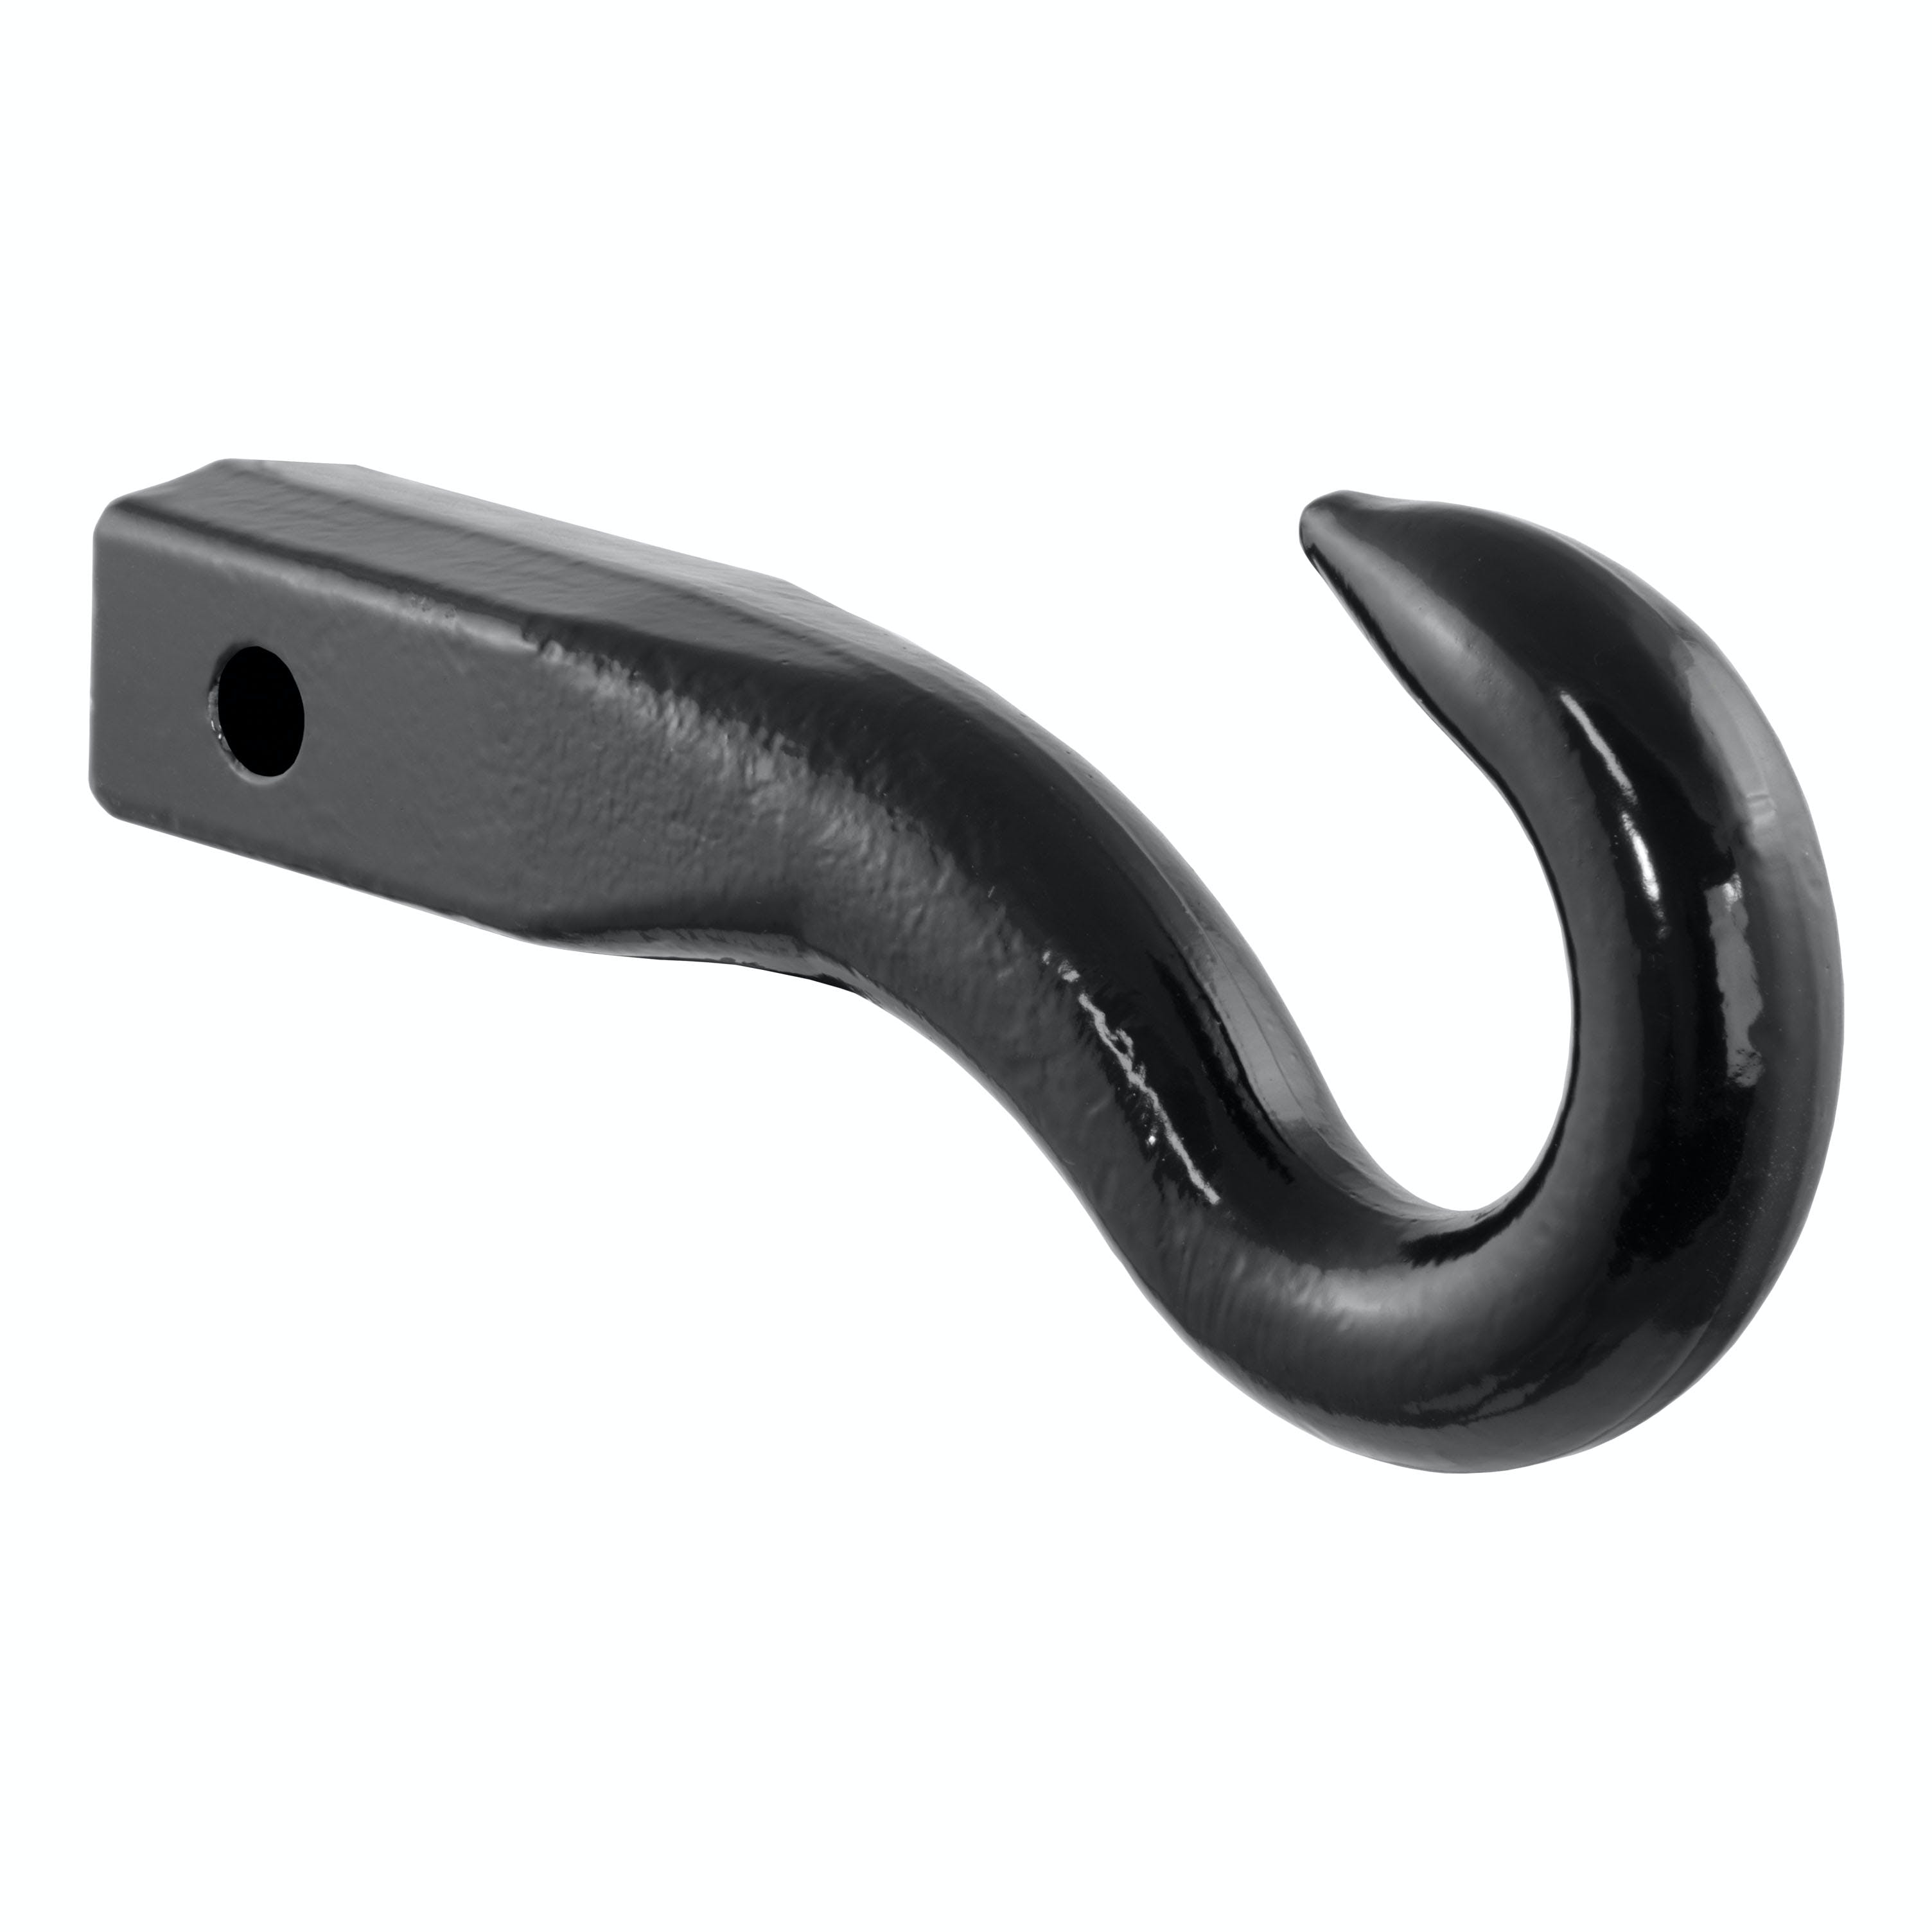 CURT 45500 Forged Tow Hook Mount (2 Shank)